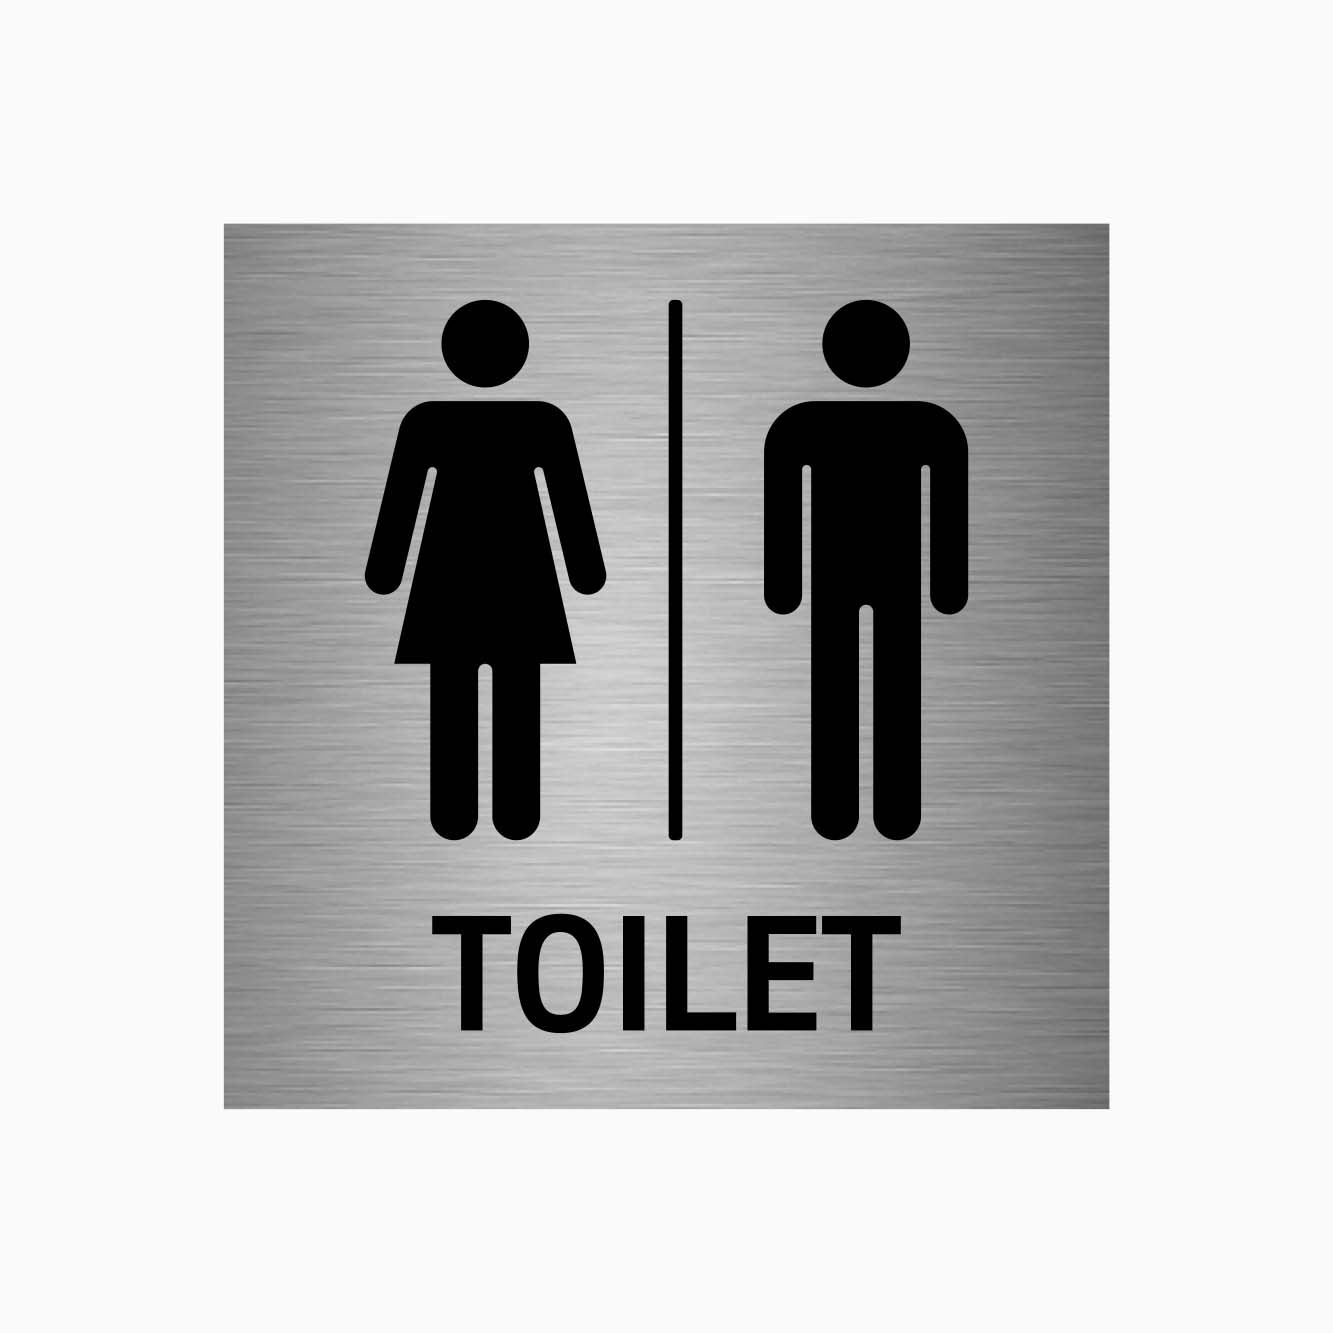 MALE AND FEMALE TOILET SIGN - GET SIGNS